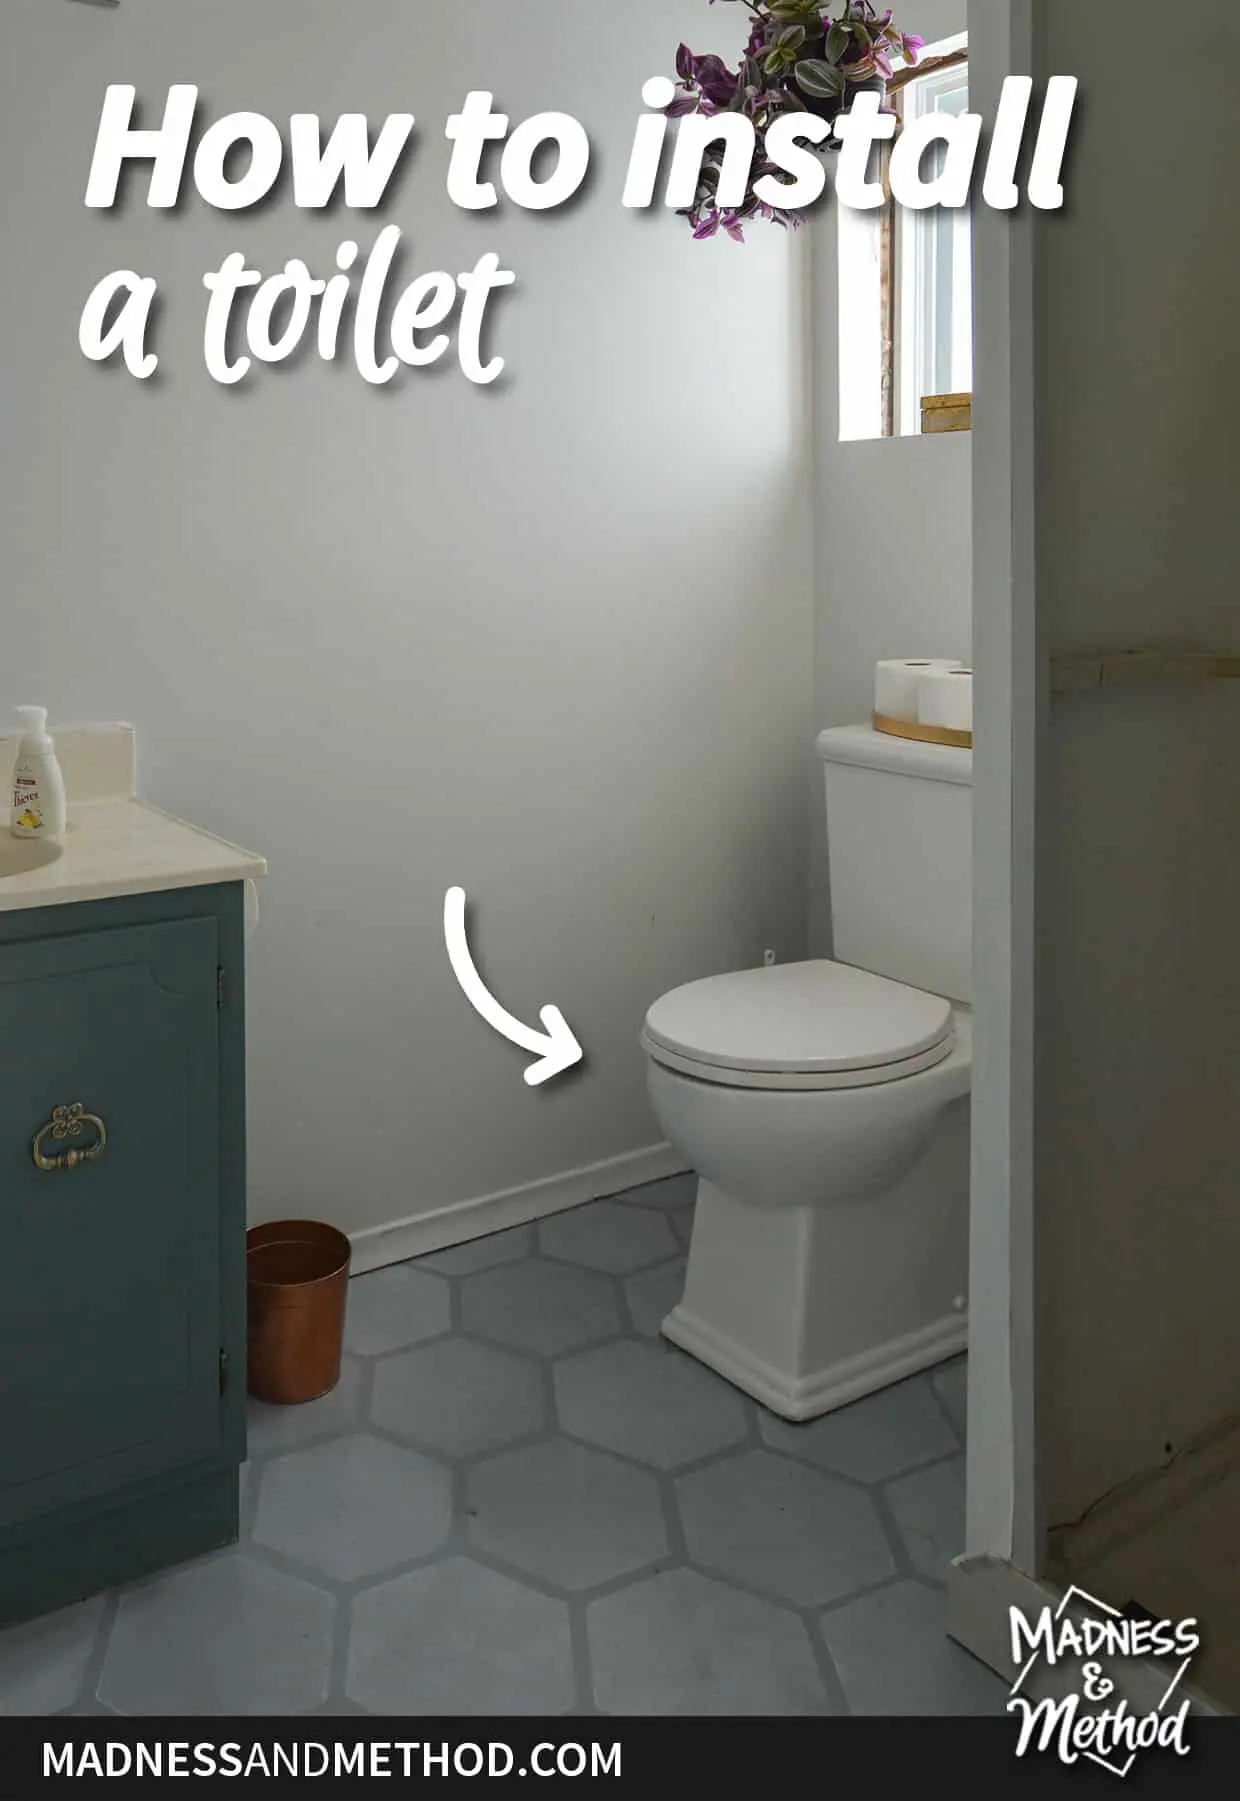 install a toilet graphic